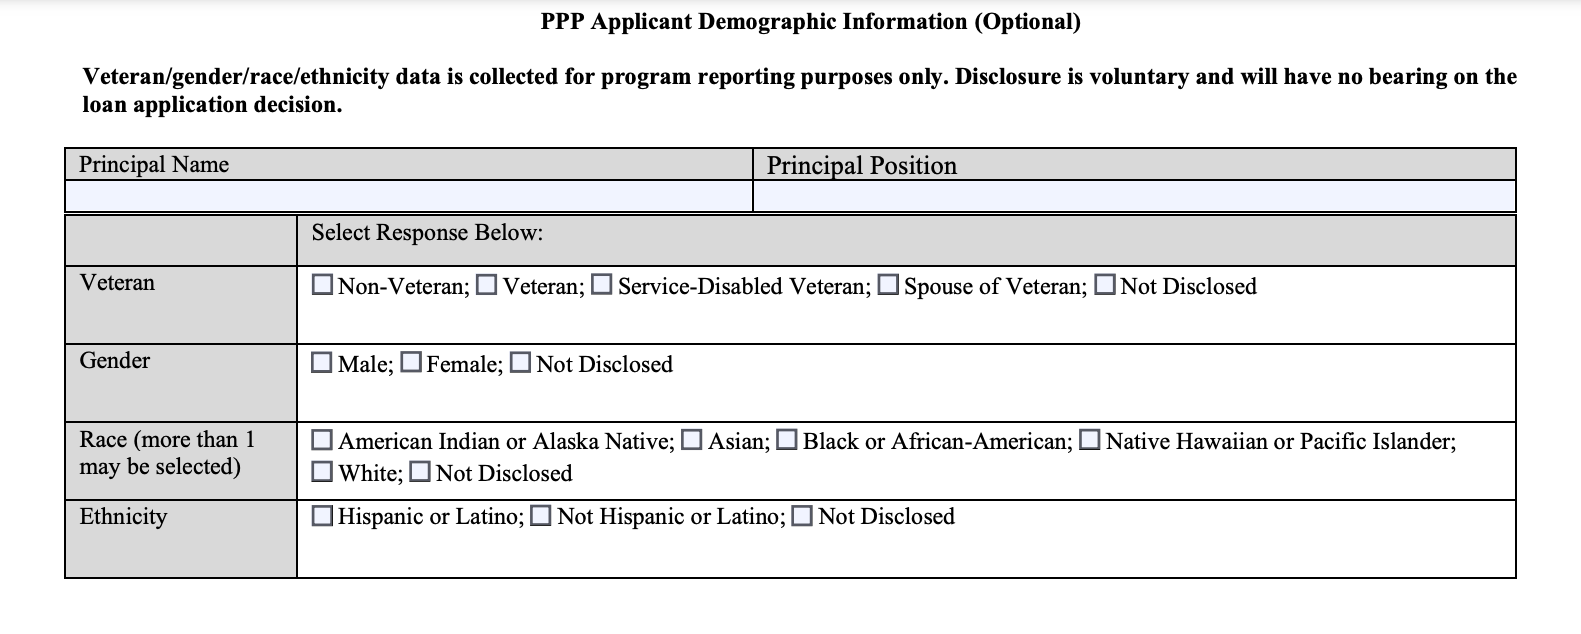 PPP Form 2483-C Section 4